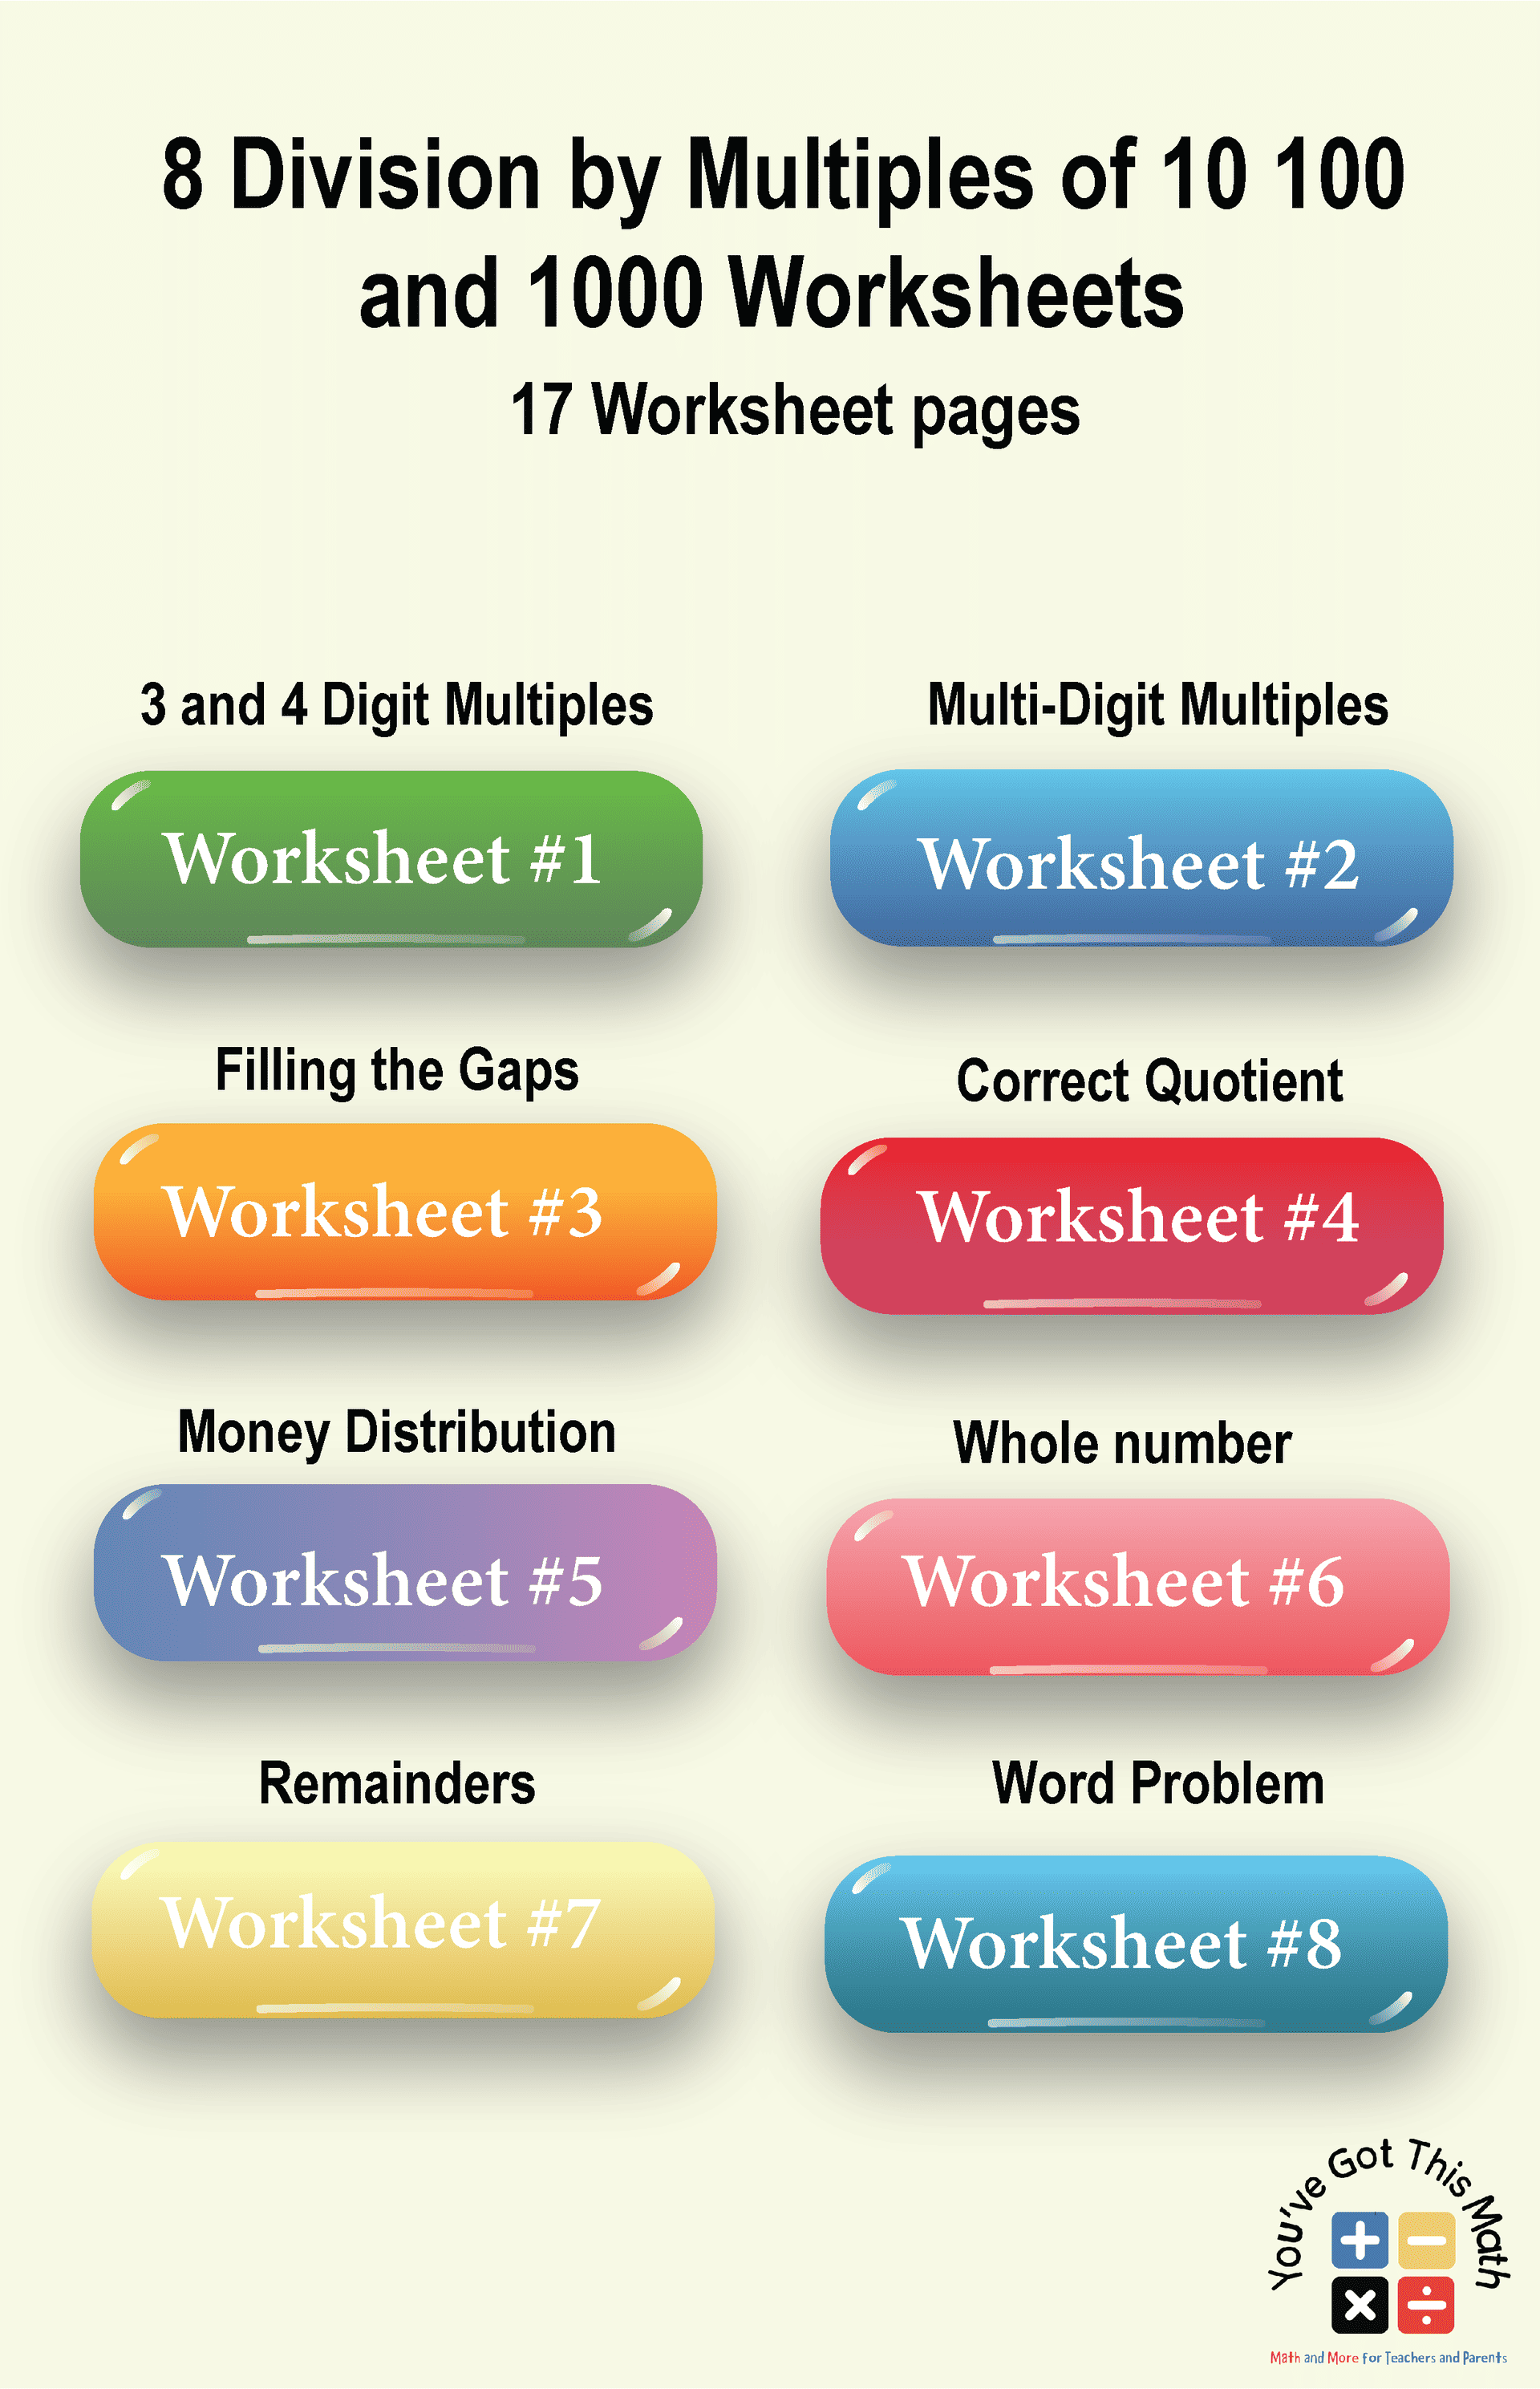 Division by Multiples of 10 100 and 1000 Worksheets box image-01